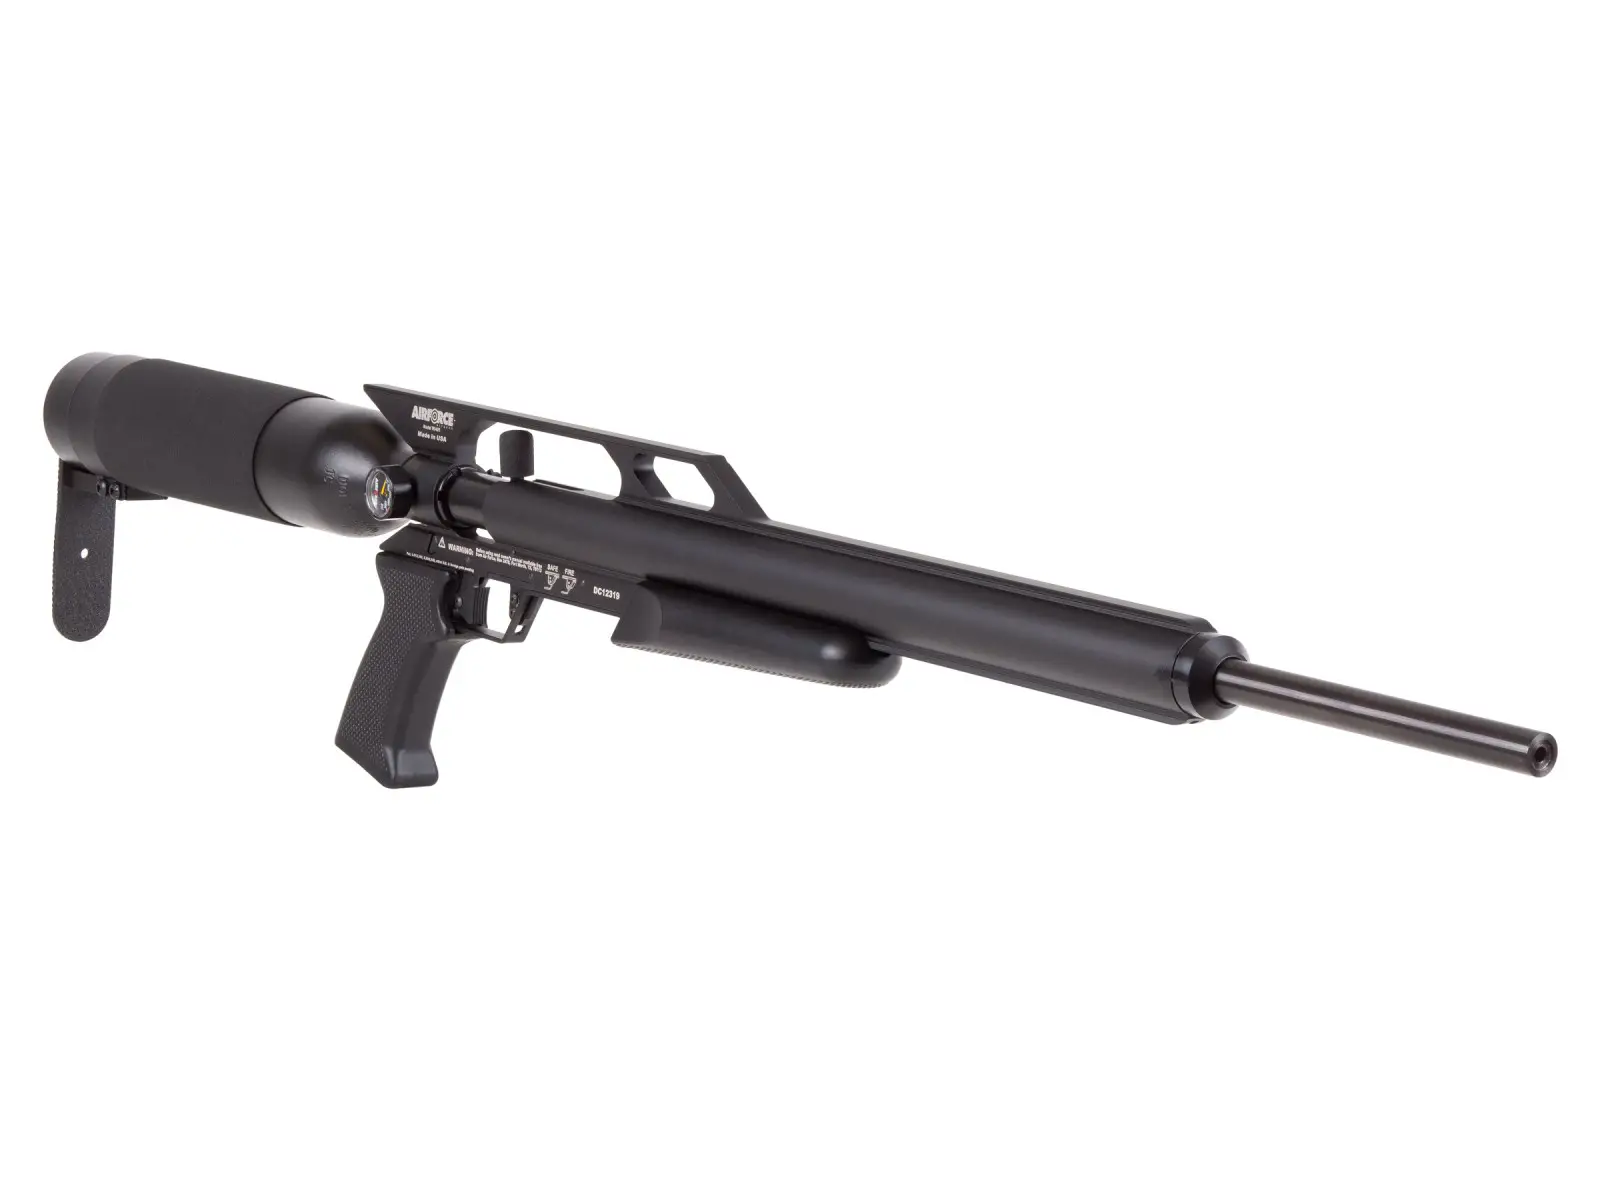 condor1 Best PCP Air Rifles Under $1000 - Top 5 Guns that Get the Job Done (Reviews and Buying Guide 2022)